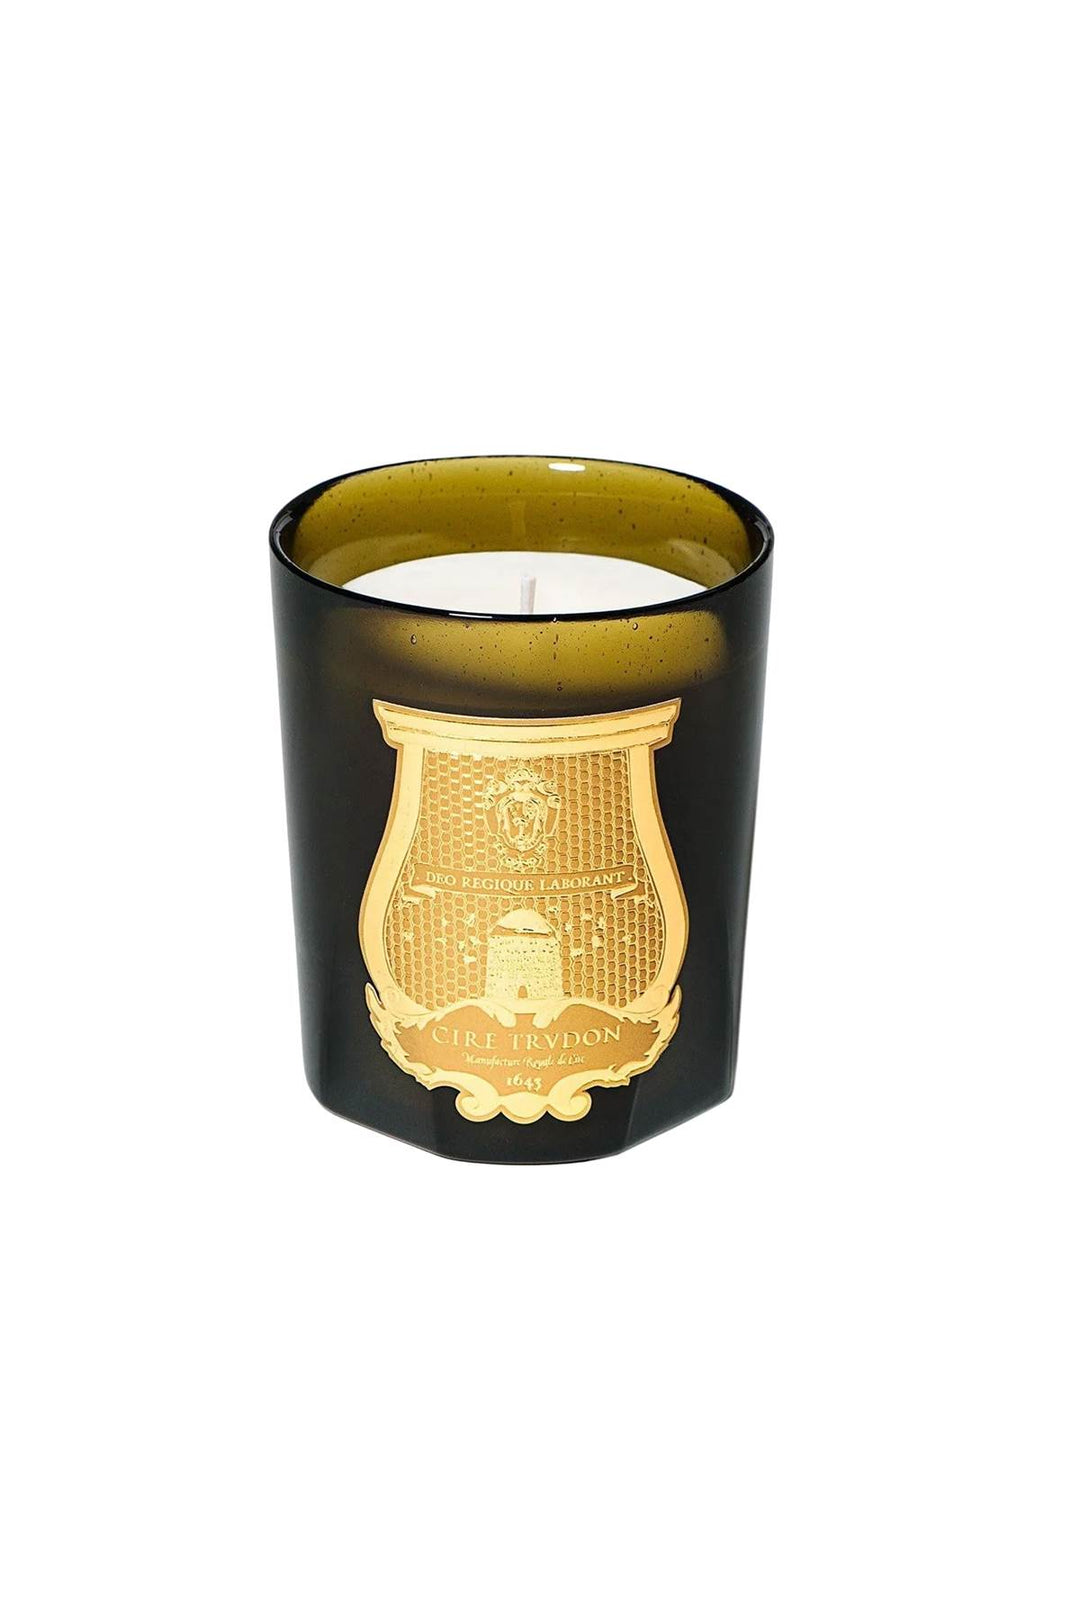 Cire trvdon scented candle "holy spirit" --0